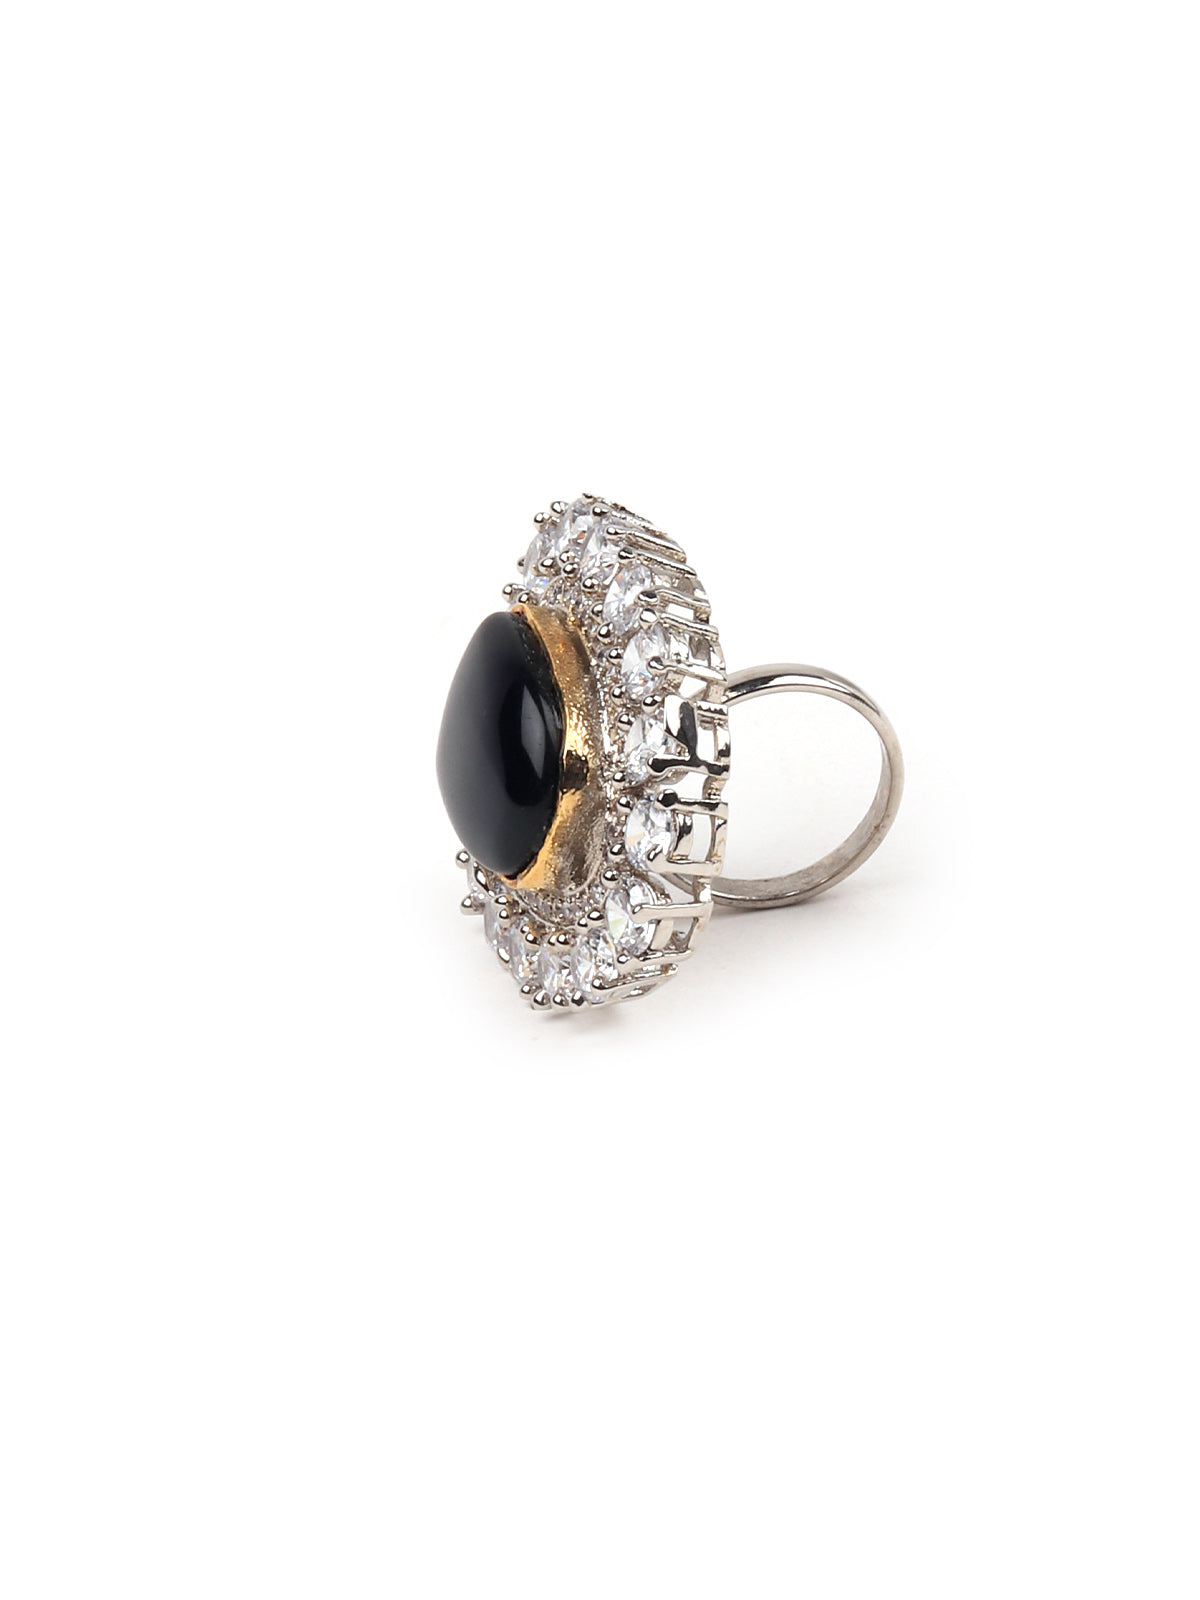 Royal Ring Studded With Dark Blue Stone